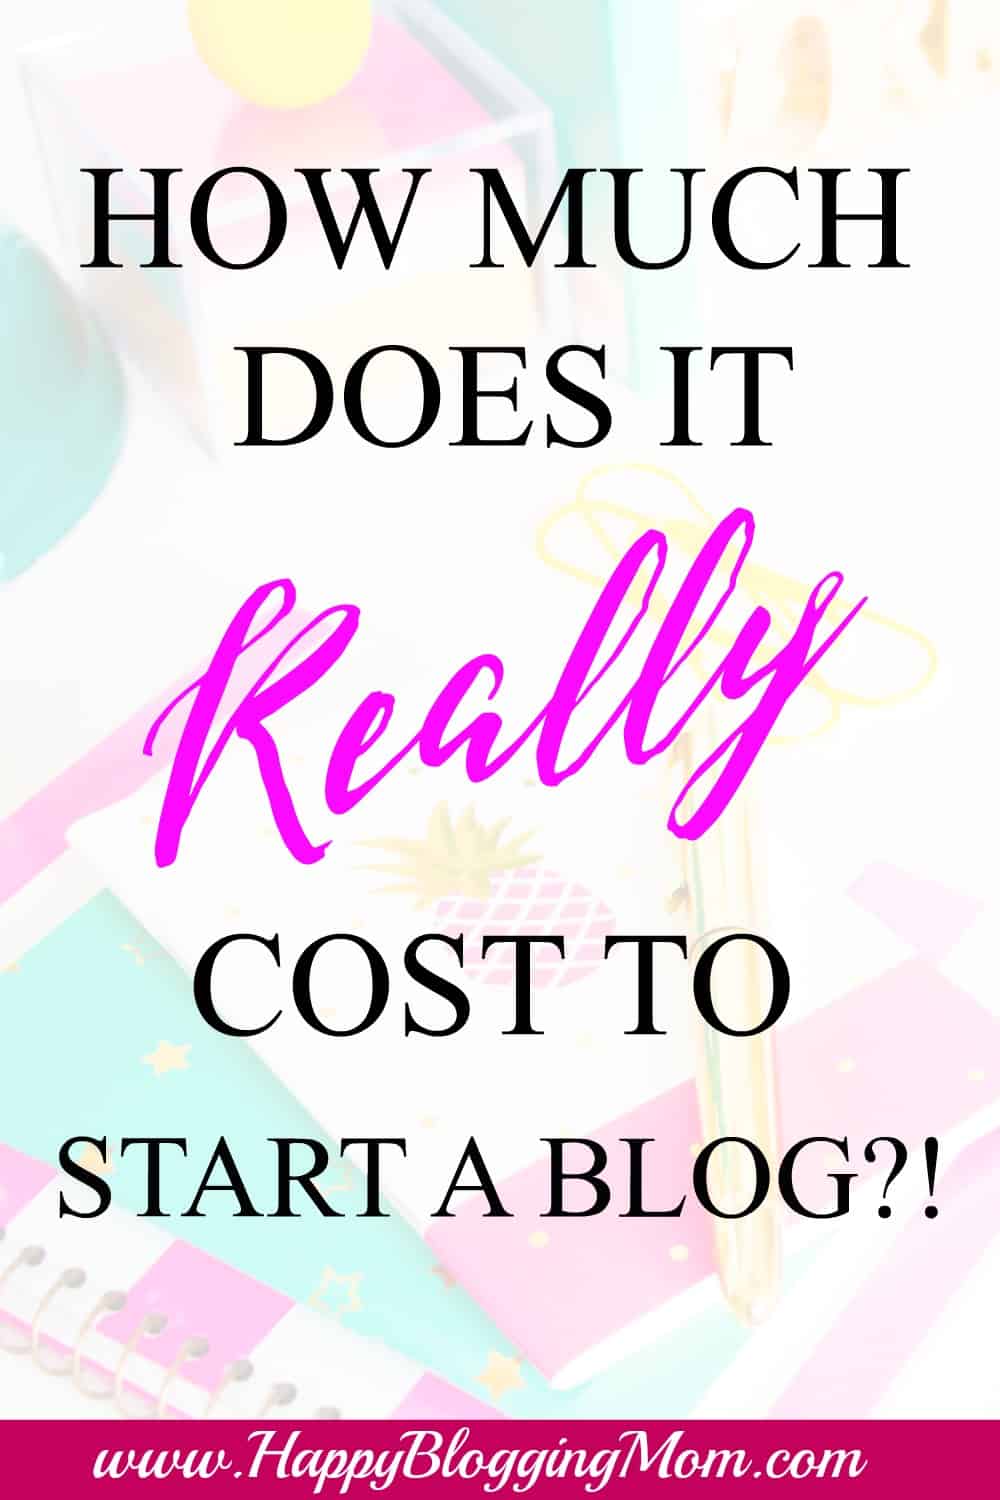 How much does it really cost to start a blog